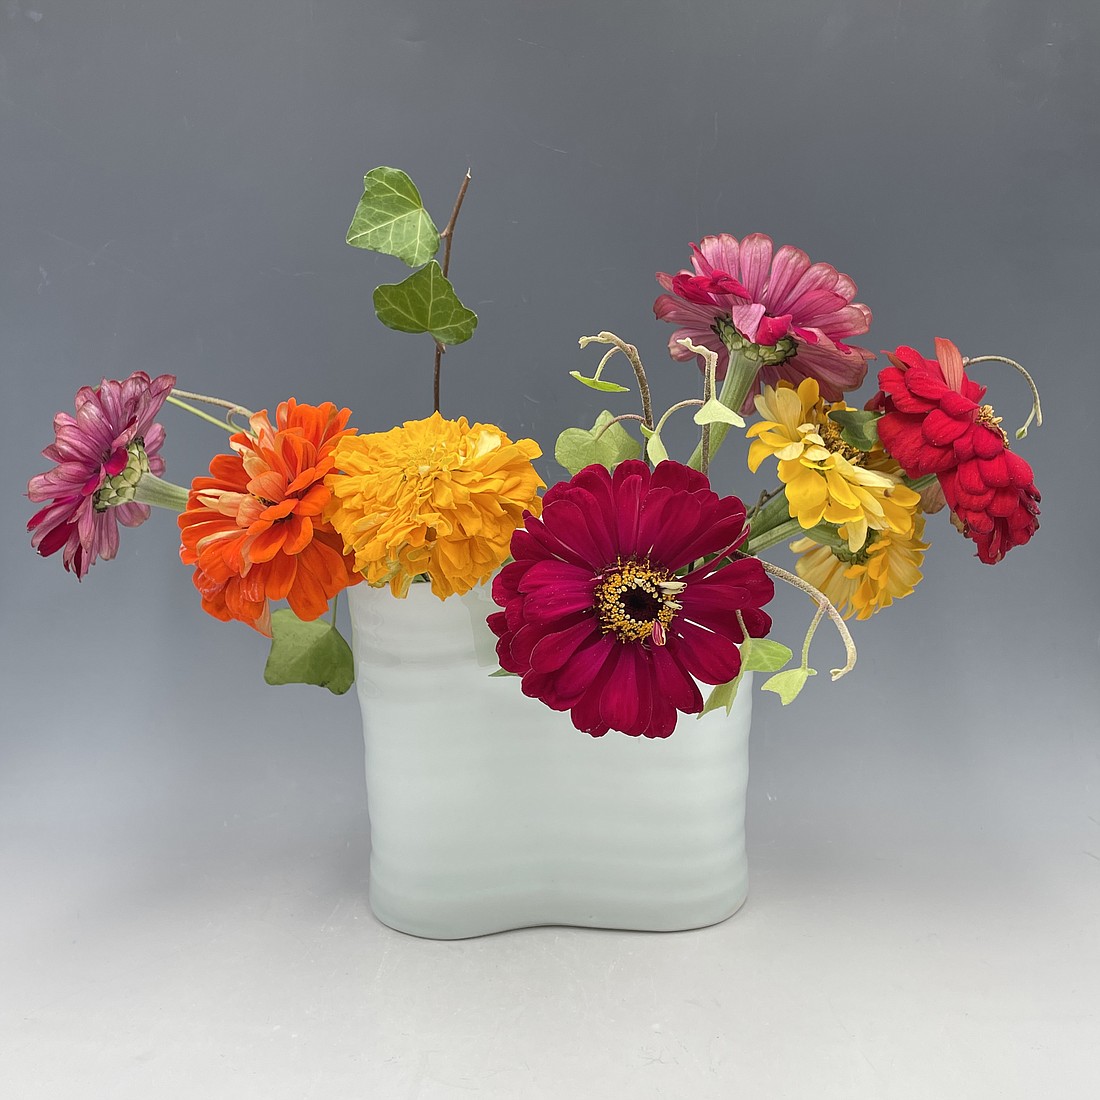 Wave Vase with Flowers by Dalia Berman is one of the artworks for sale at the Clay Art Center Holiday Market which runs thru Dec. 23. See 10573 Calendar of Events for details.